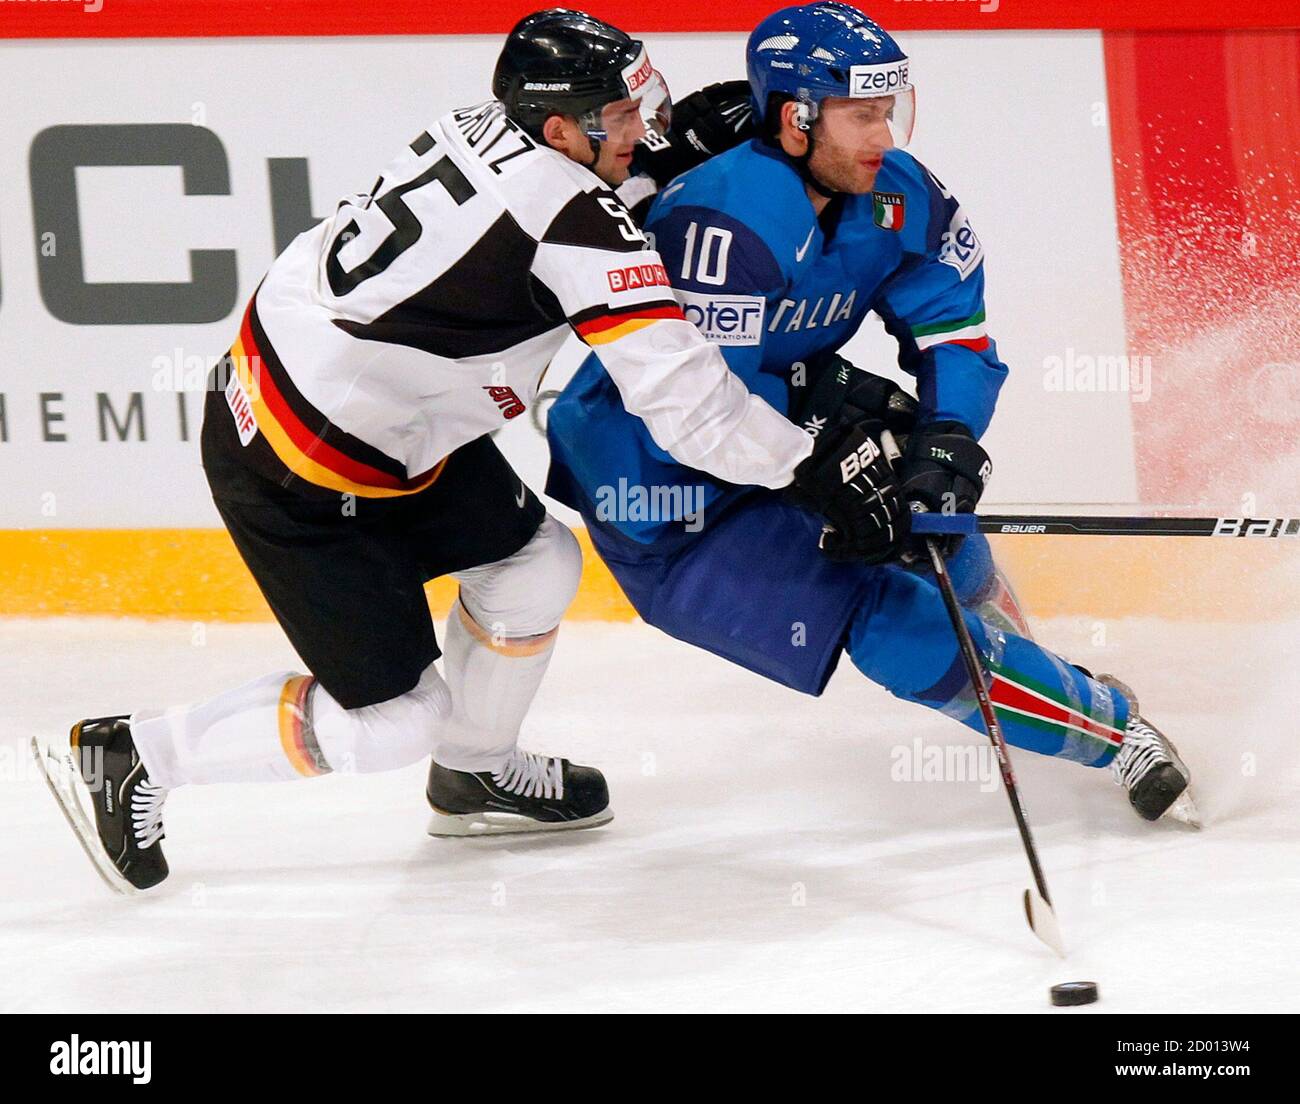 Italy's Giulio Scandella (R) fights for puck with the Germany's Felix Schutz  during their 2012 IIHF ice hockey Worlds Championship Group S game in  Stockholm May 4, 2012. REUTERS/Petr Josek (SWEDEN -